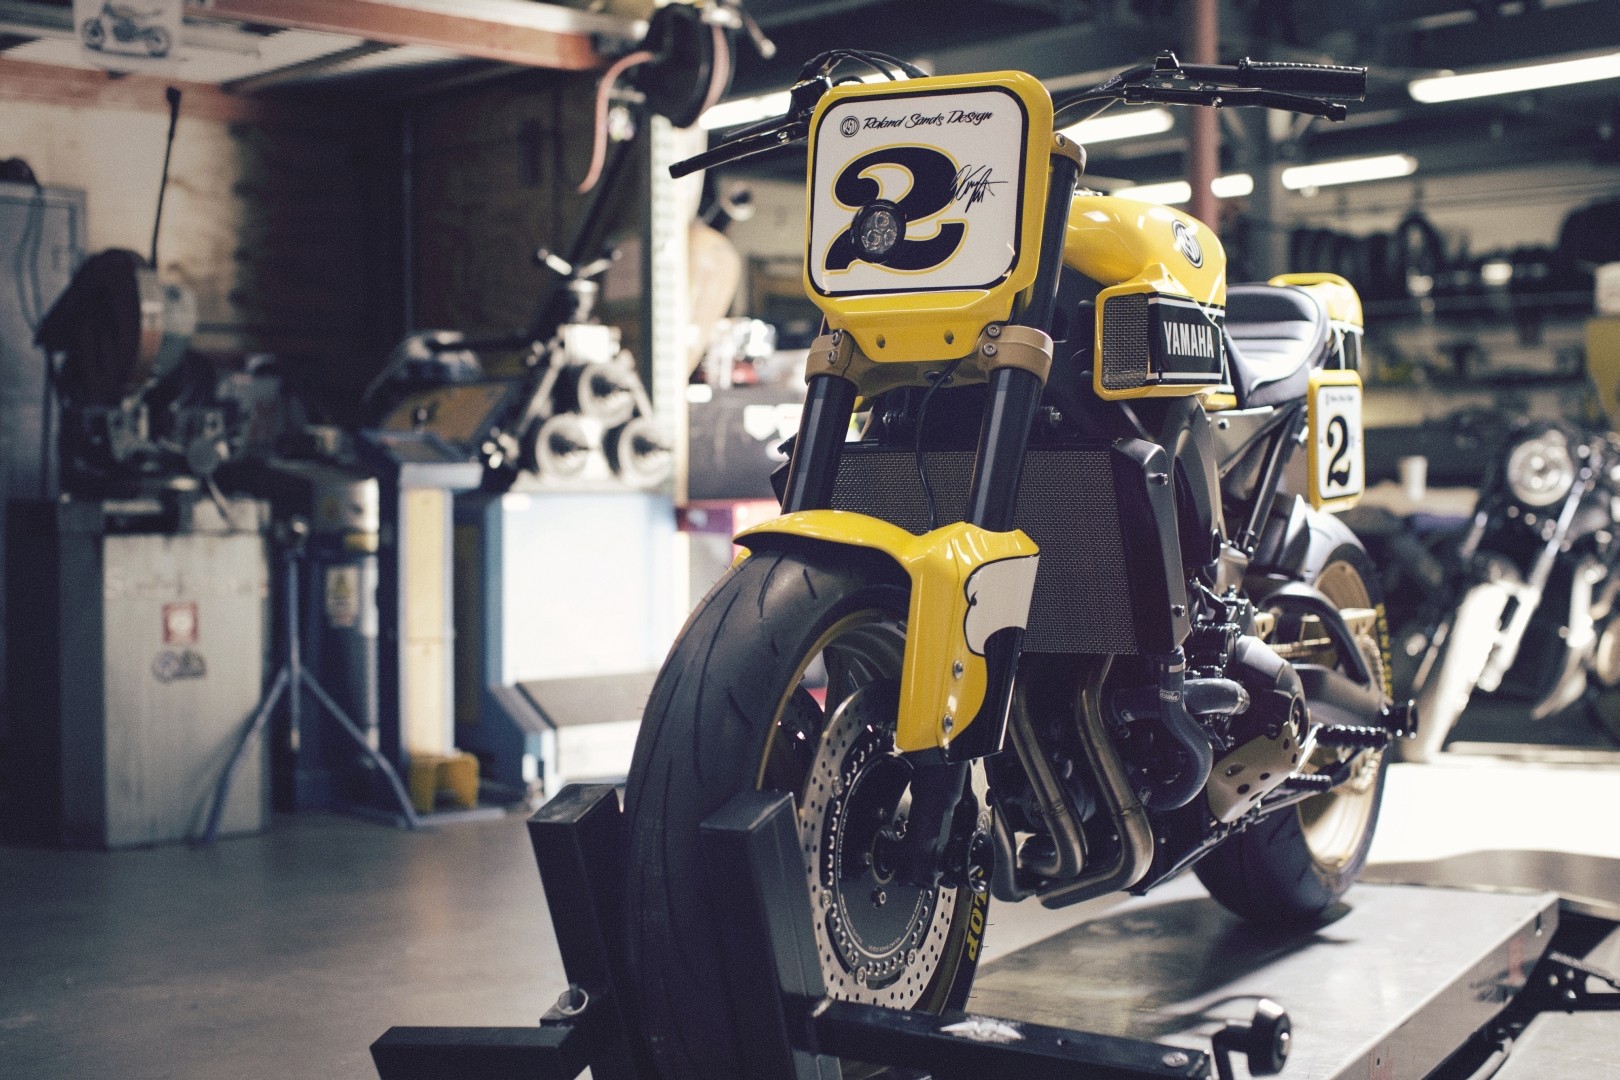 Démontage support de phare et neiman  Roland-sands-faster-wasp-previews-the-yamaha-xsr900-photo-gallery_13